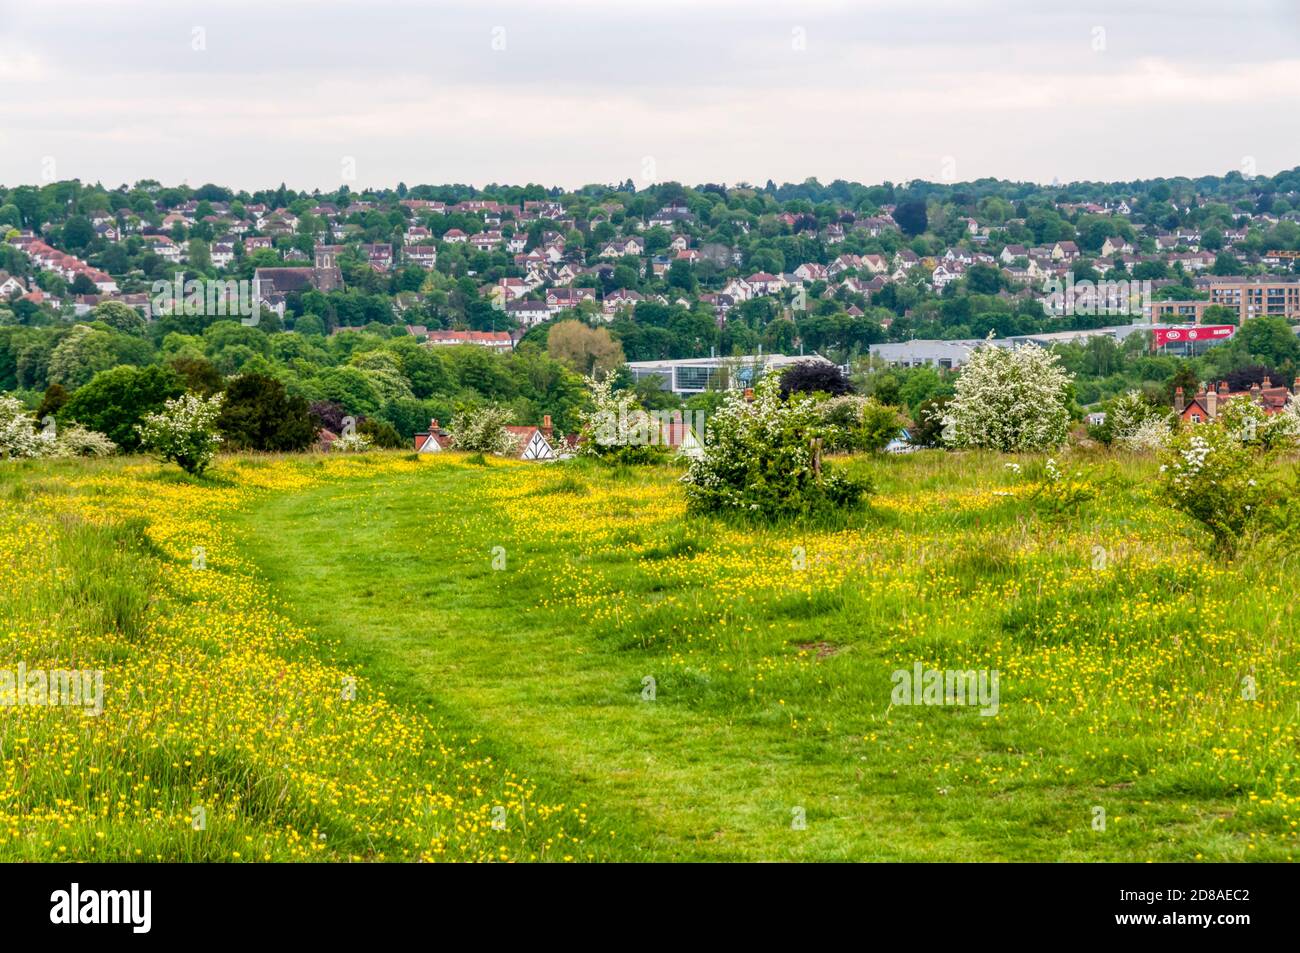 Farthing Downs, an area of open space owned by the City forming part of green belt land to the south of London. Stock Photo